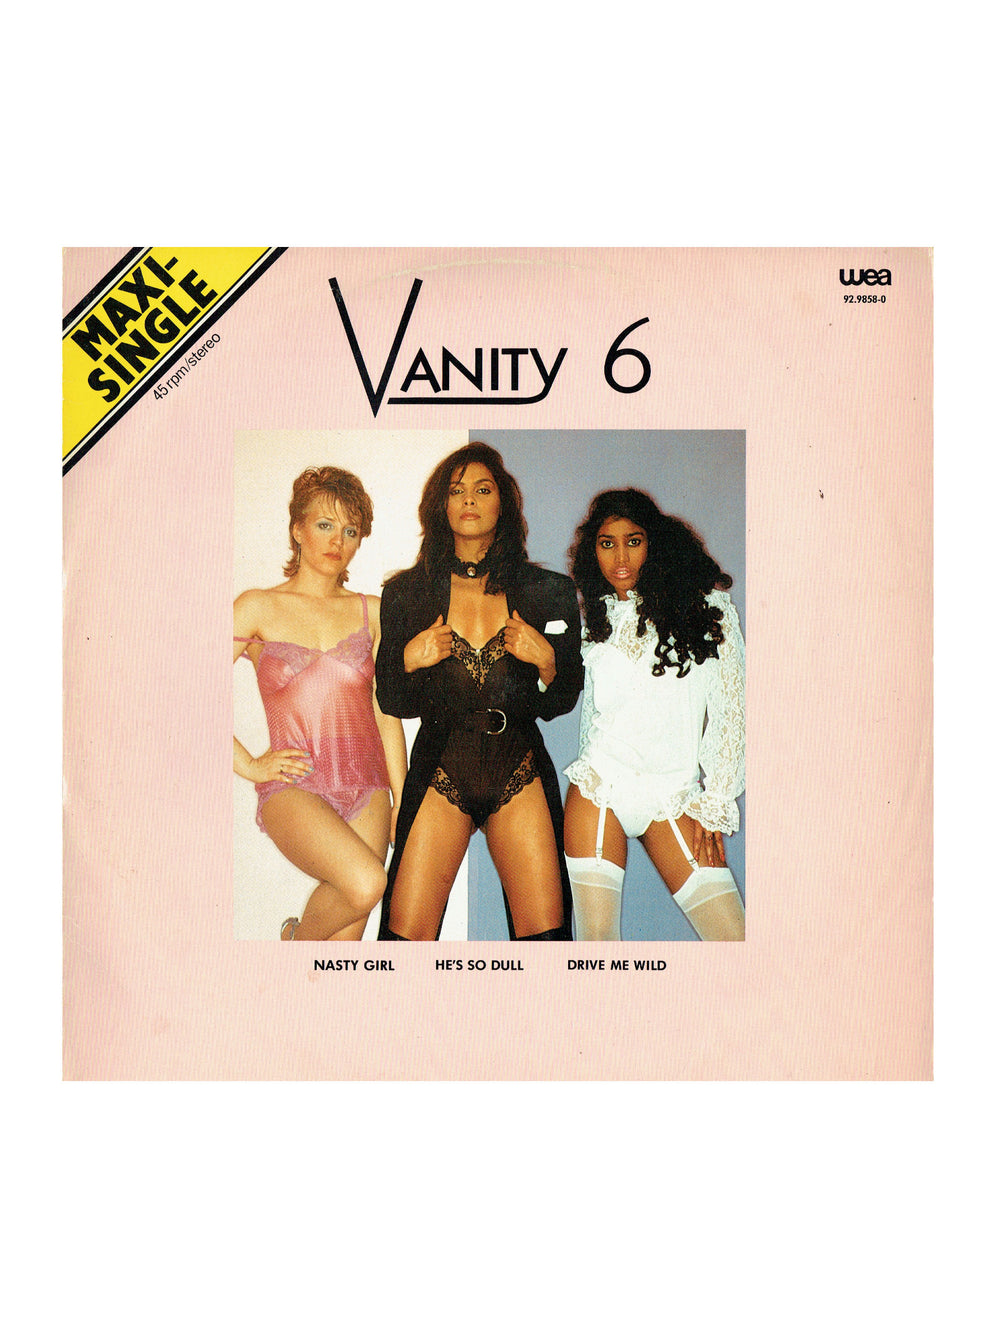 Prince – Vanity 6 Nasty Girl He's So Dull EU Holland 12 Inch Vinyl Release Prince EX AS